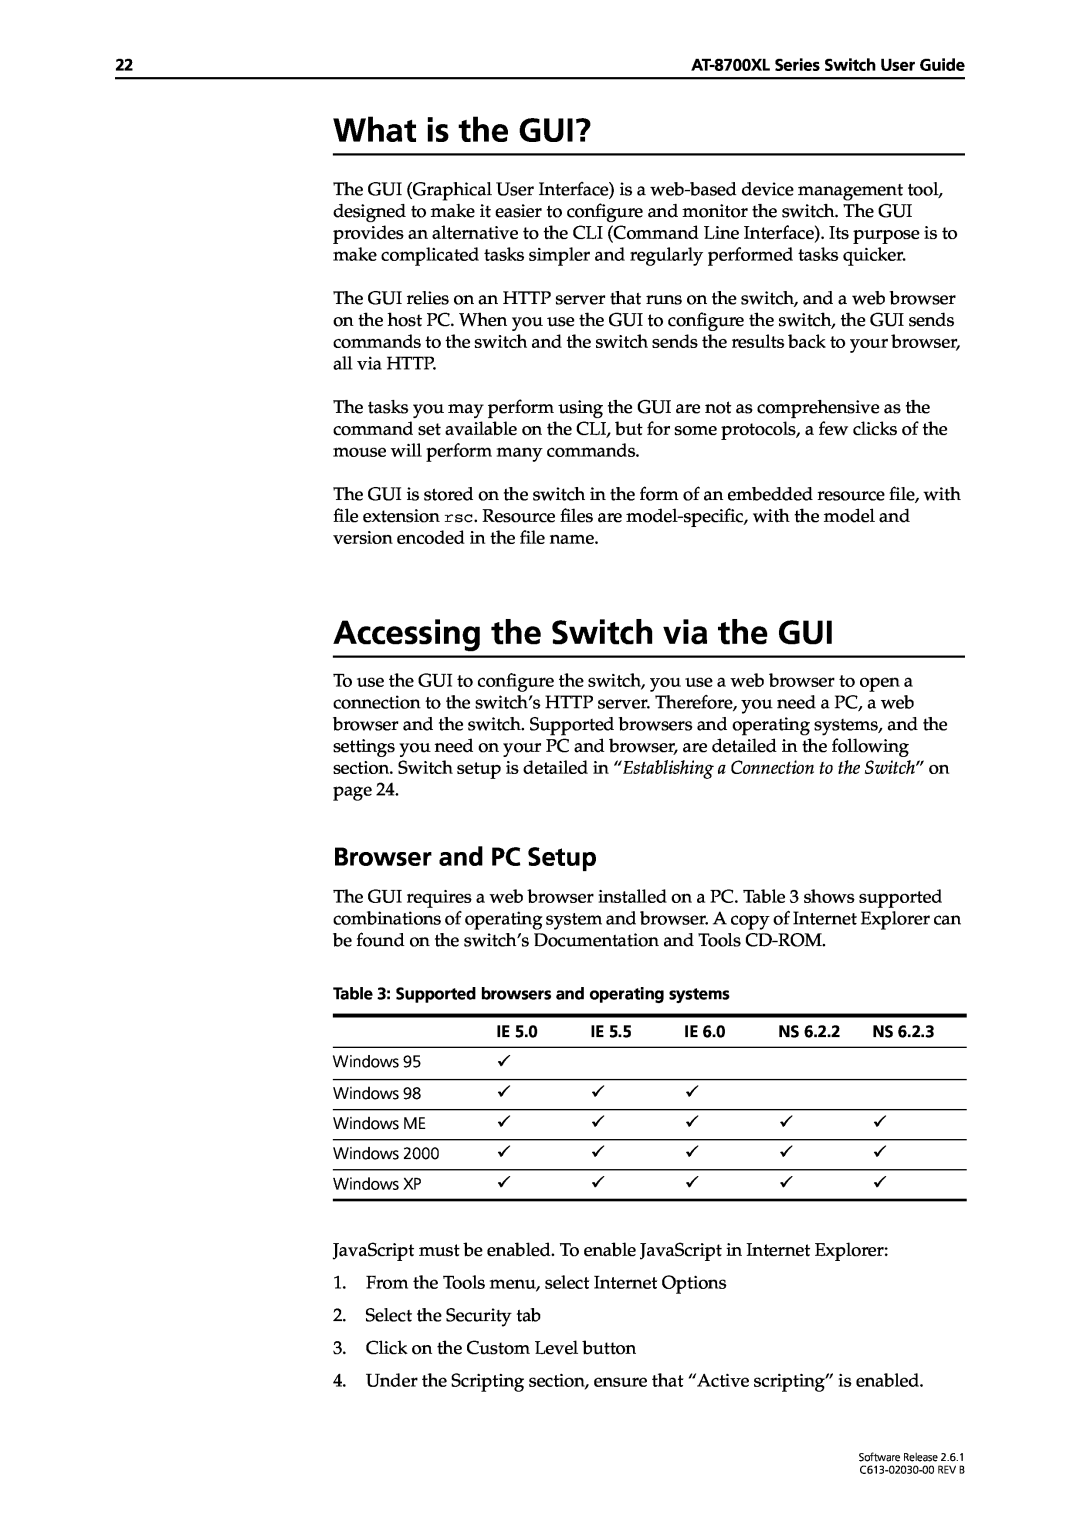 Allied Telesis at-8700xl series switch manual What is the GUI?, Accessing the Switch via the GUI, Browser and PC Setup 